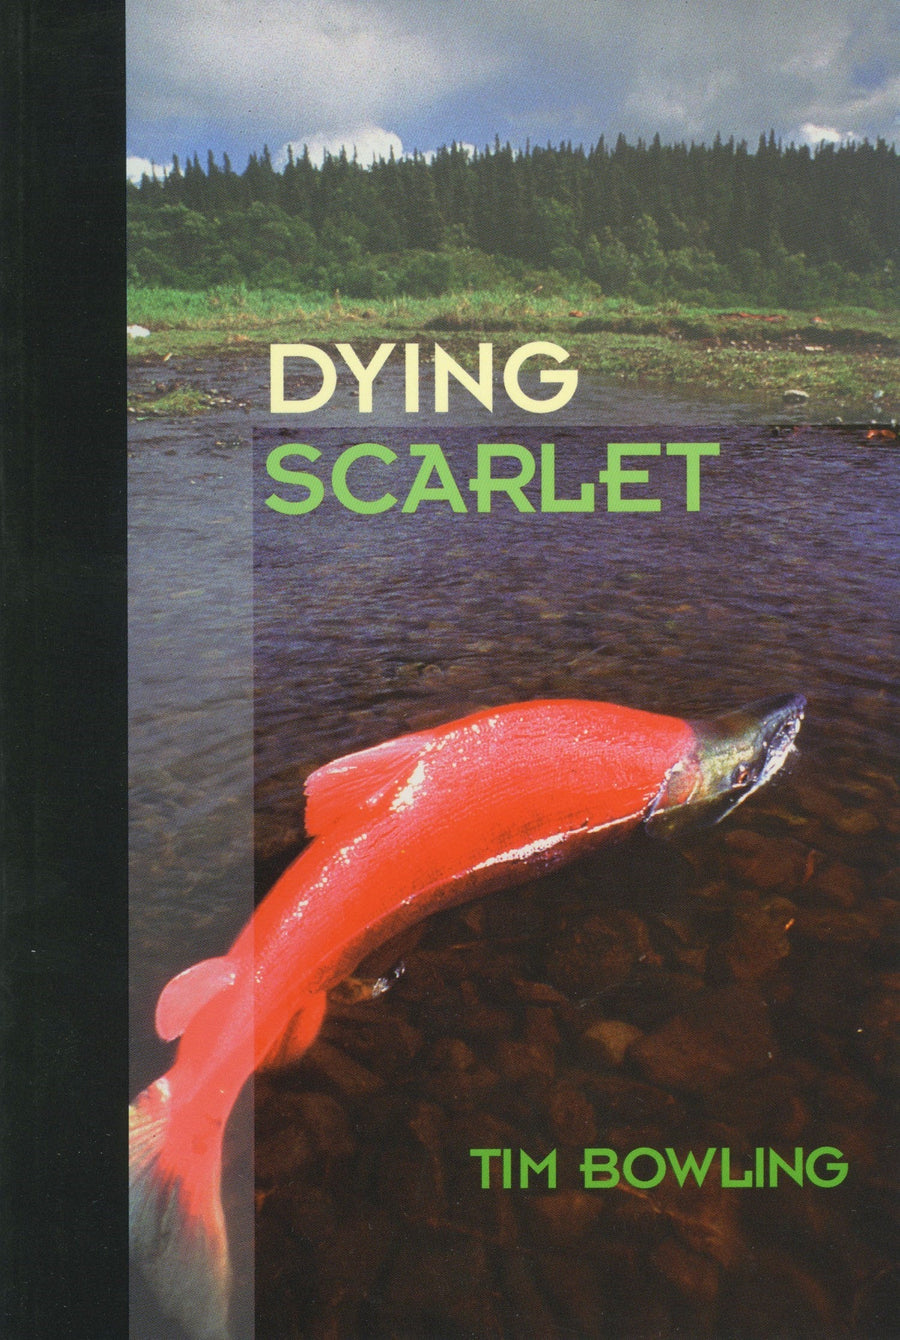 Dying Scarlet